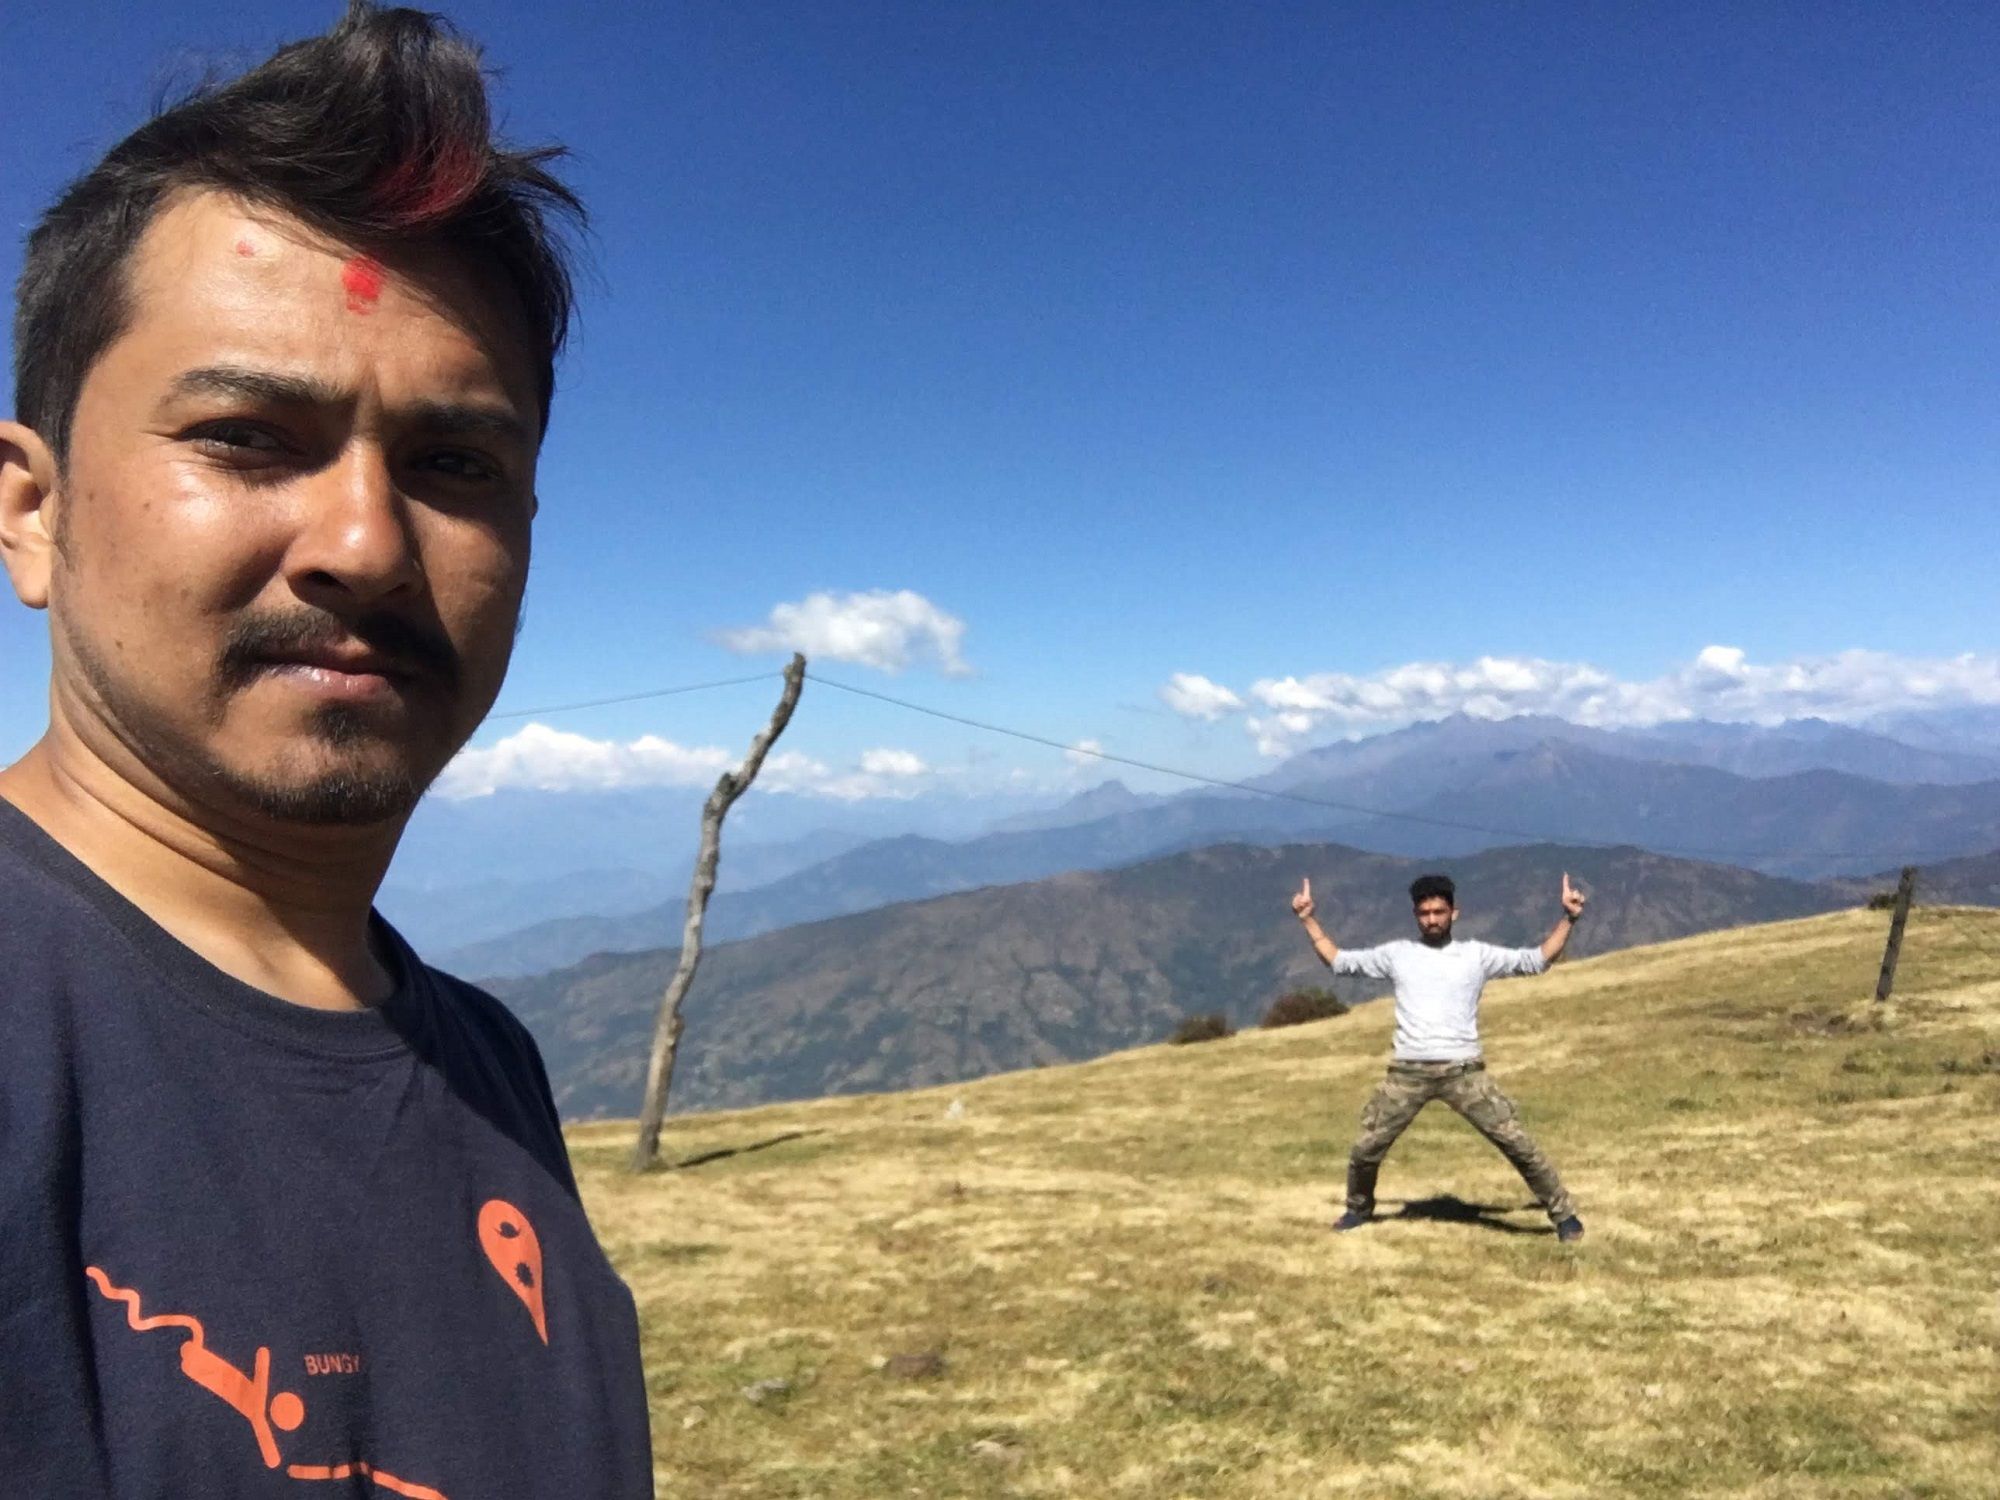 Uncle and me, Everest Range on background